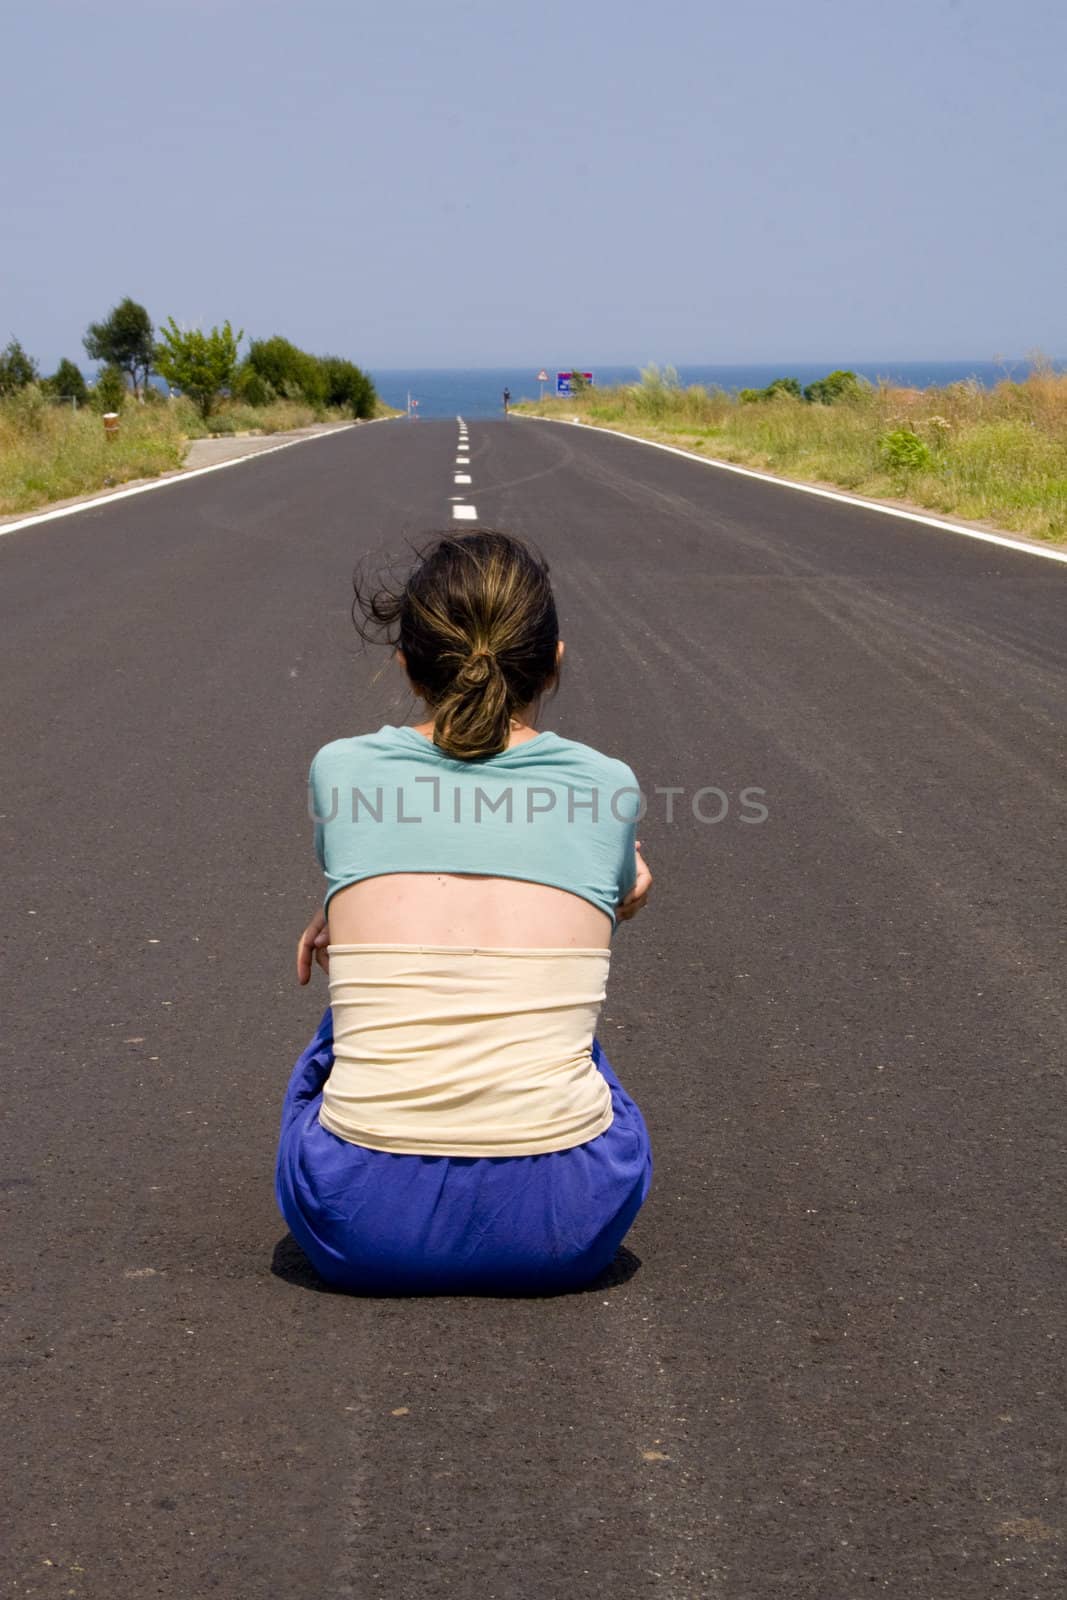 Woman in road by timscottrom